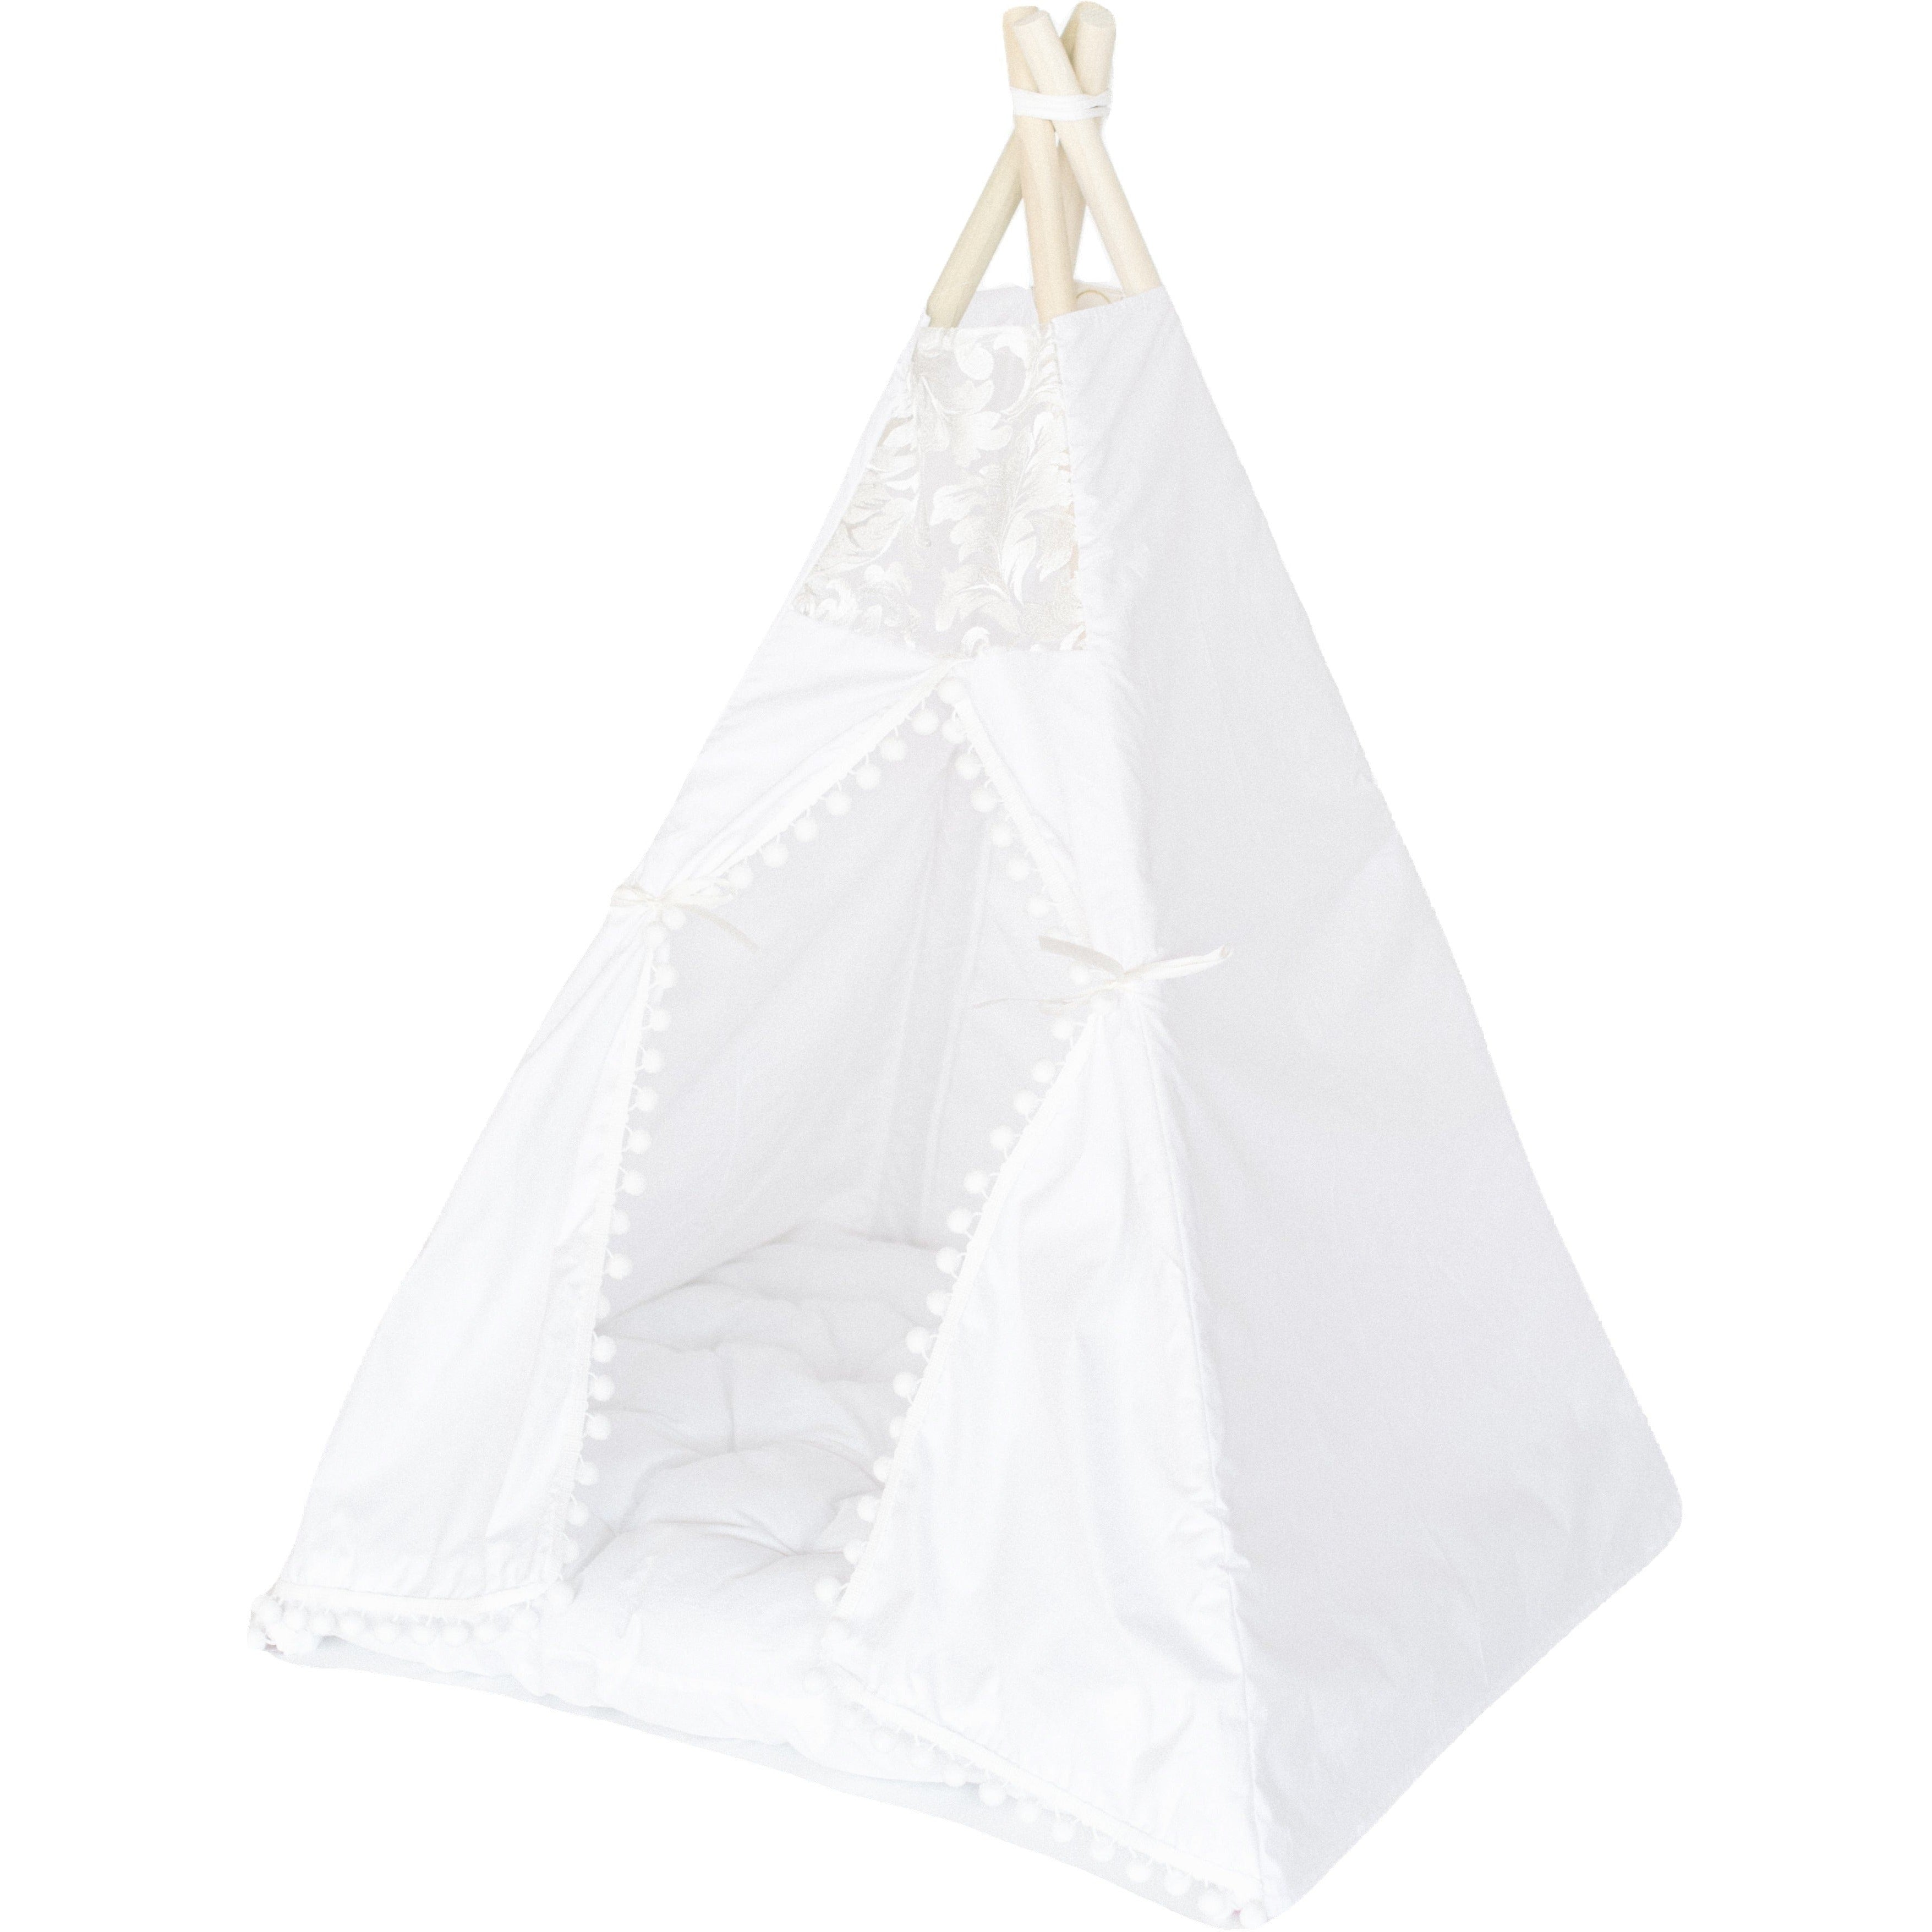 The Evelyn Itty Bitty Play Tent